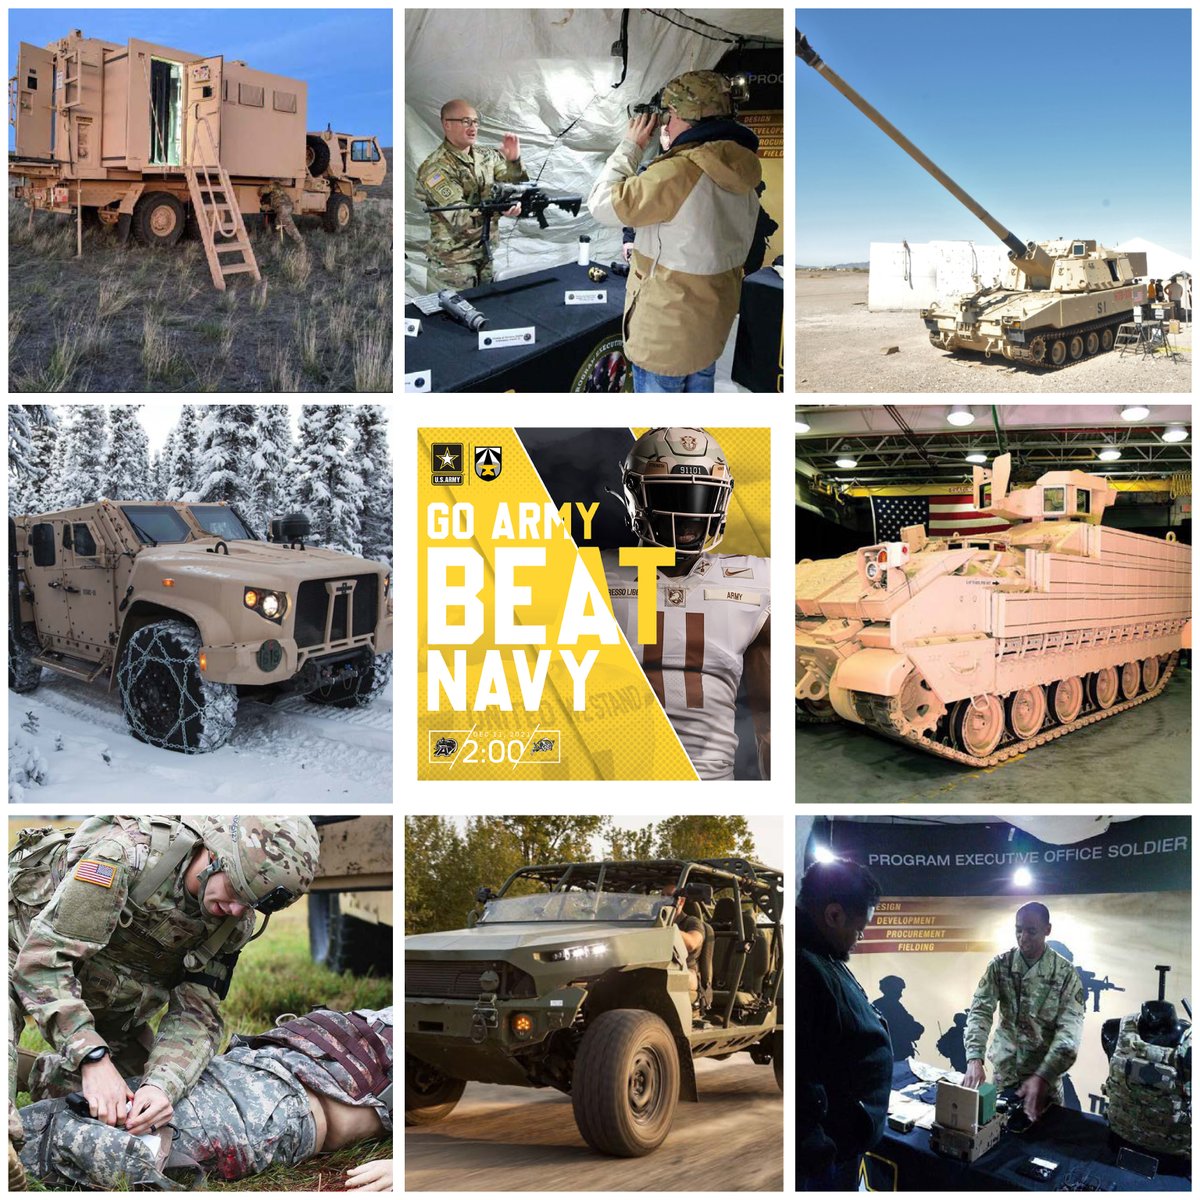 AFC & our partners are excited to showcase our joint efforts related to Army modernization at today's Army/Navy Football game!

ERCA (LRPF CFT + @peogcs)
CPI2 (N-CFT + @PEOC3T)
AMPV & ISV (@NGCVCFT + @peogcs + @peocscss)
MSTC (@usamrdc + @peo_stri)
Soldier equipment (@PEOSoldier)